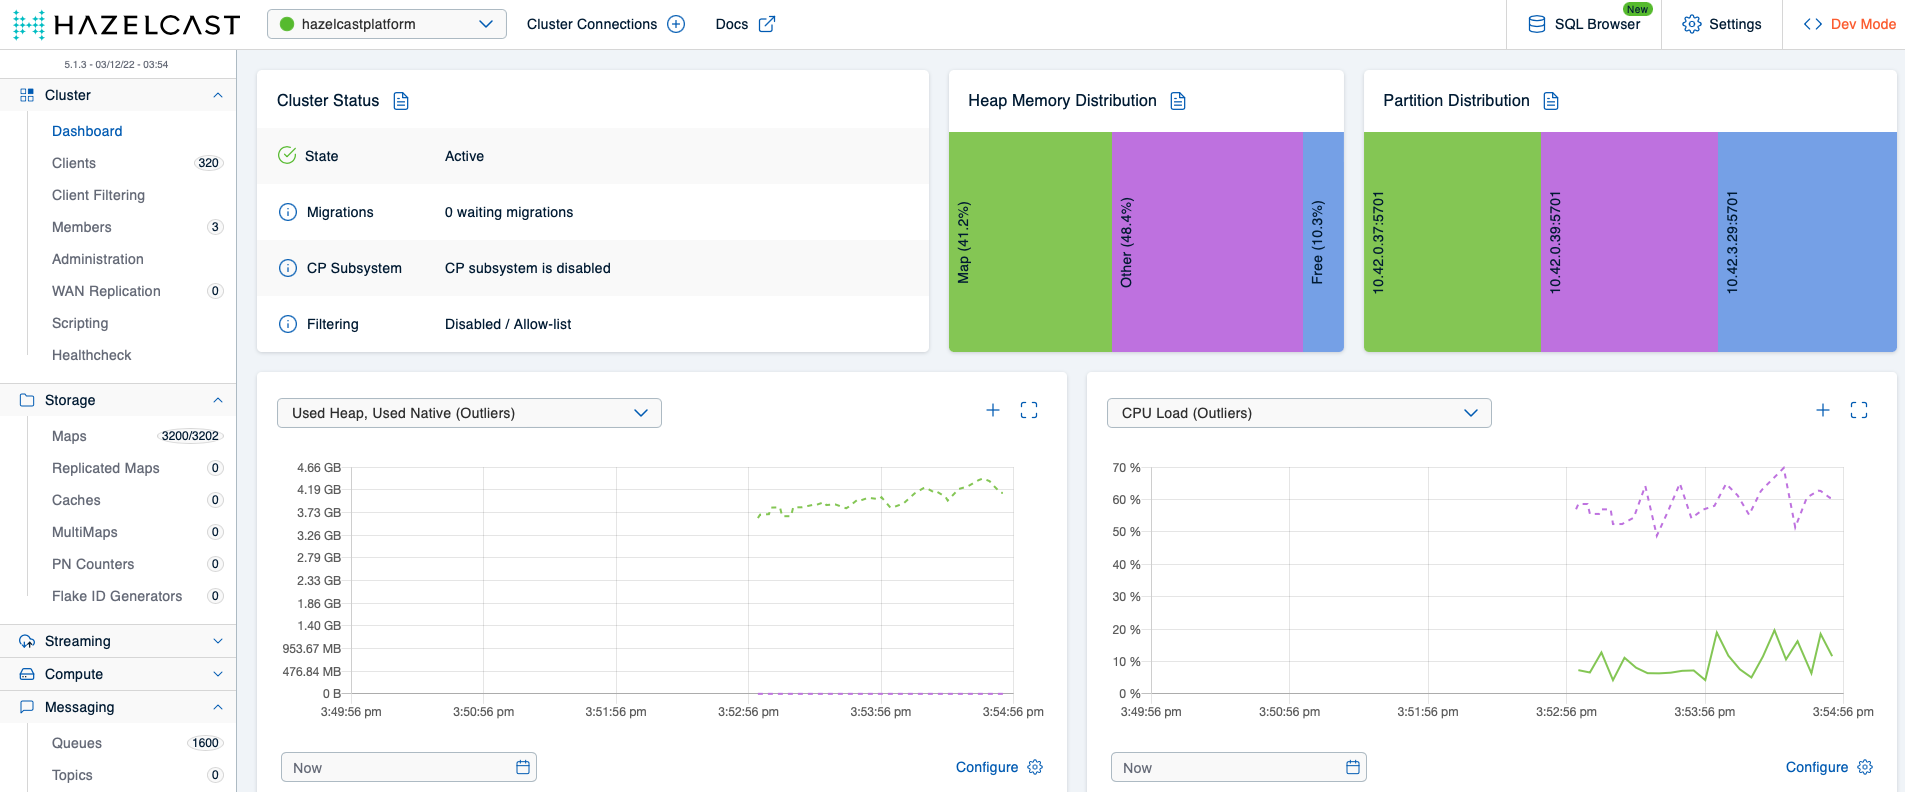 View on the Hazelcast cluster state in the Mancenter's dashboard.